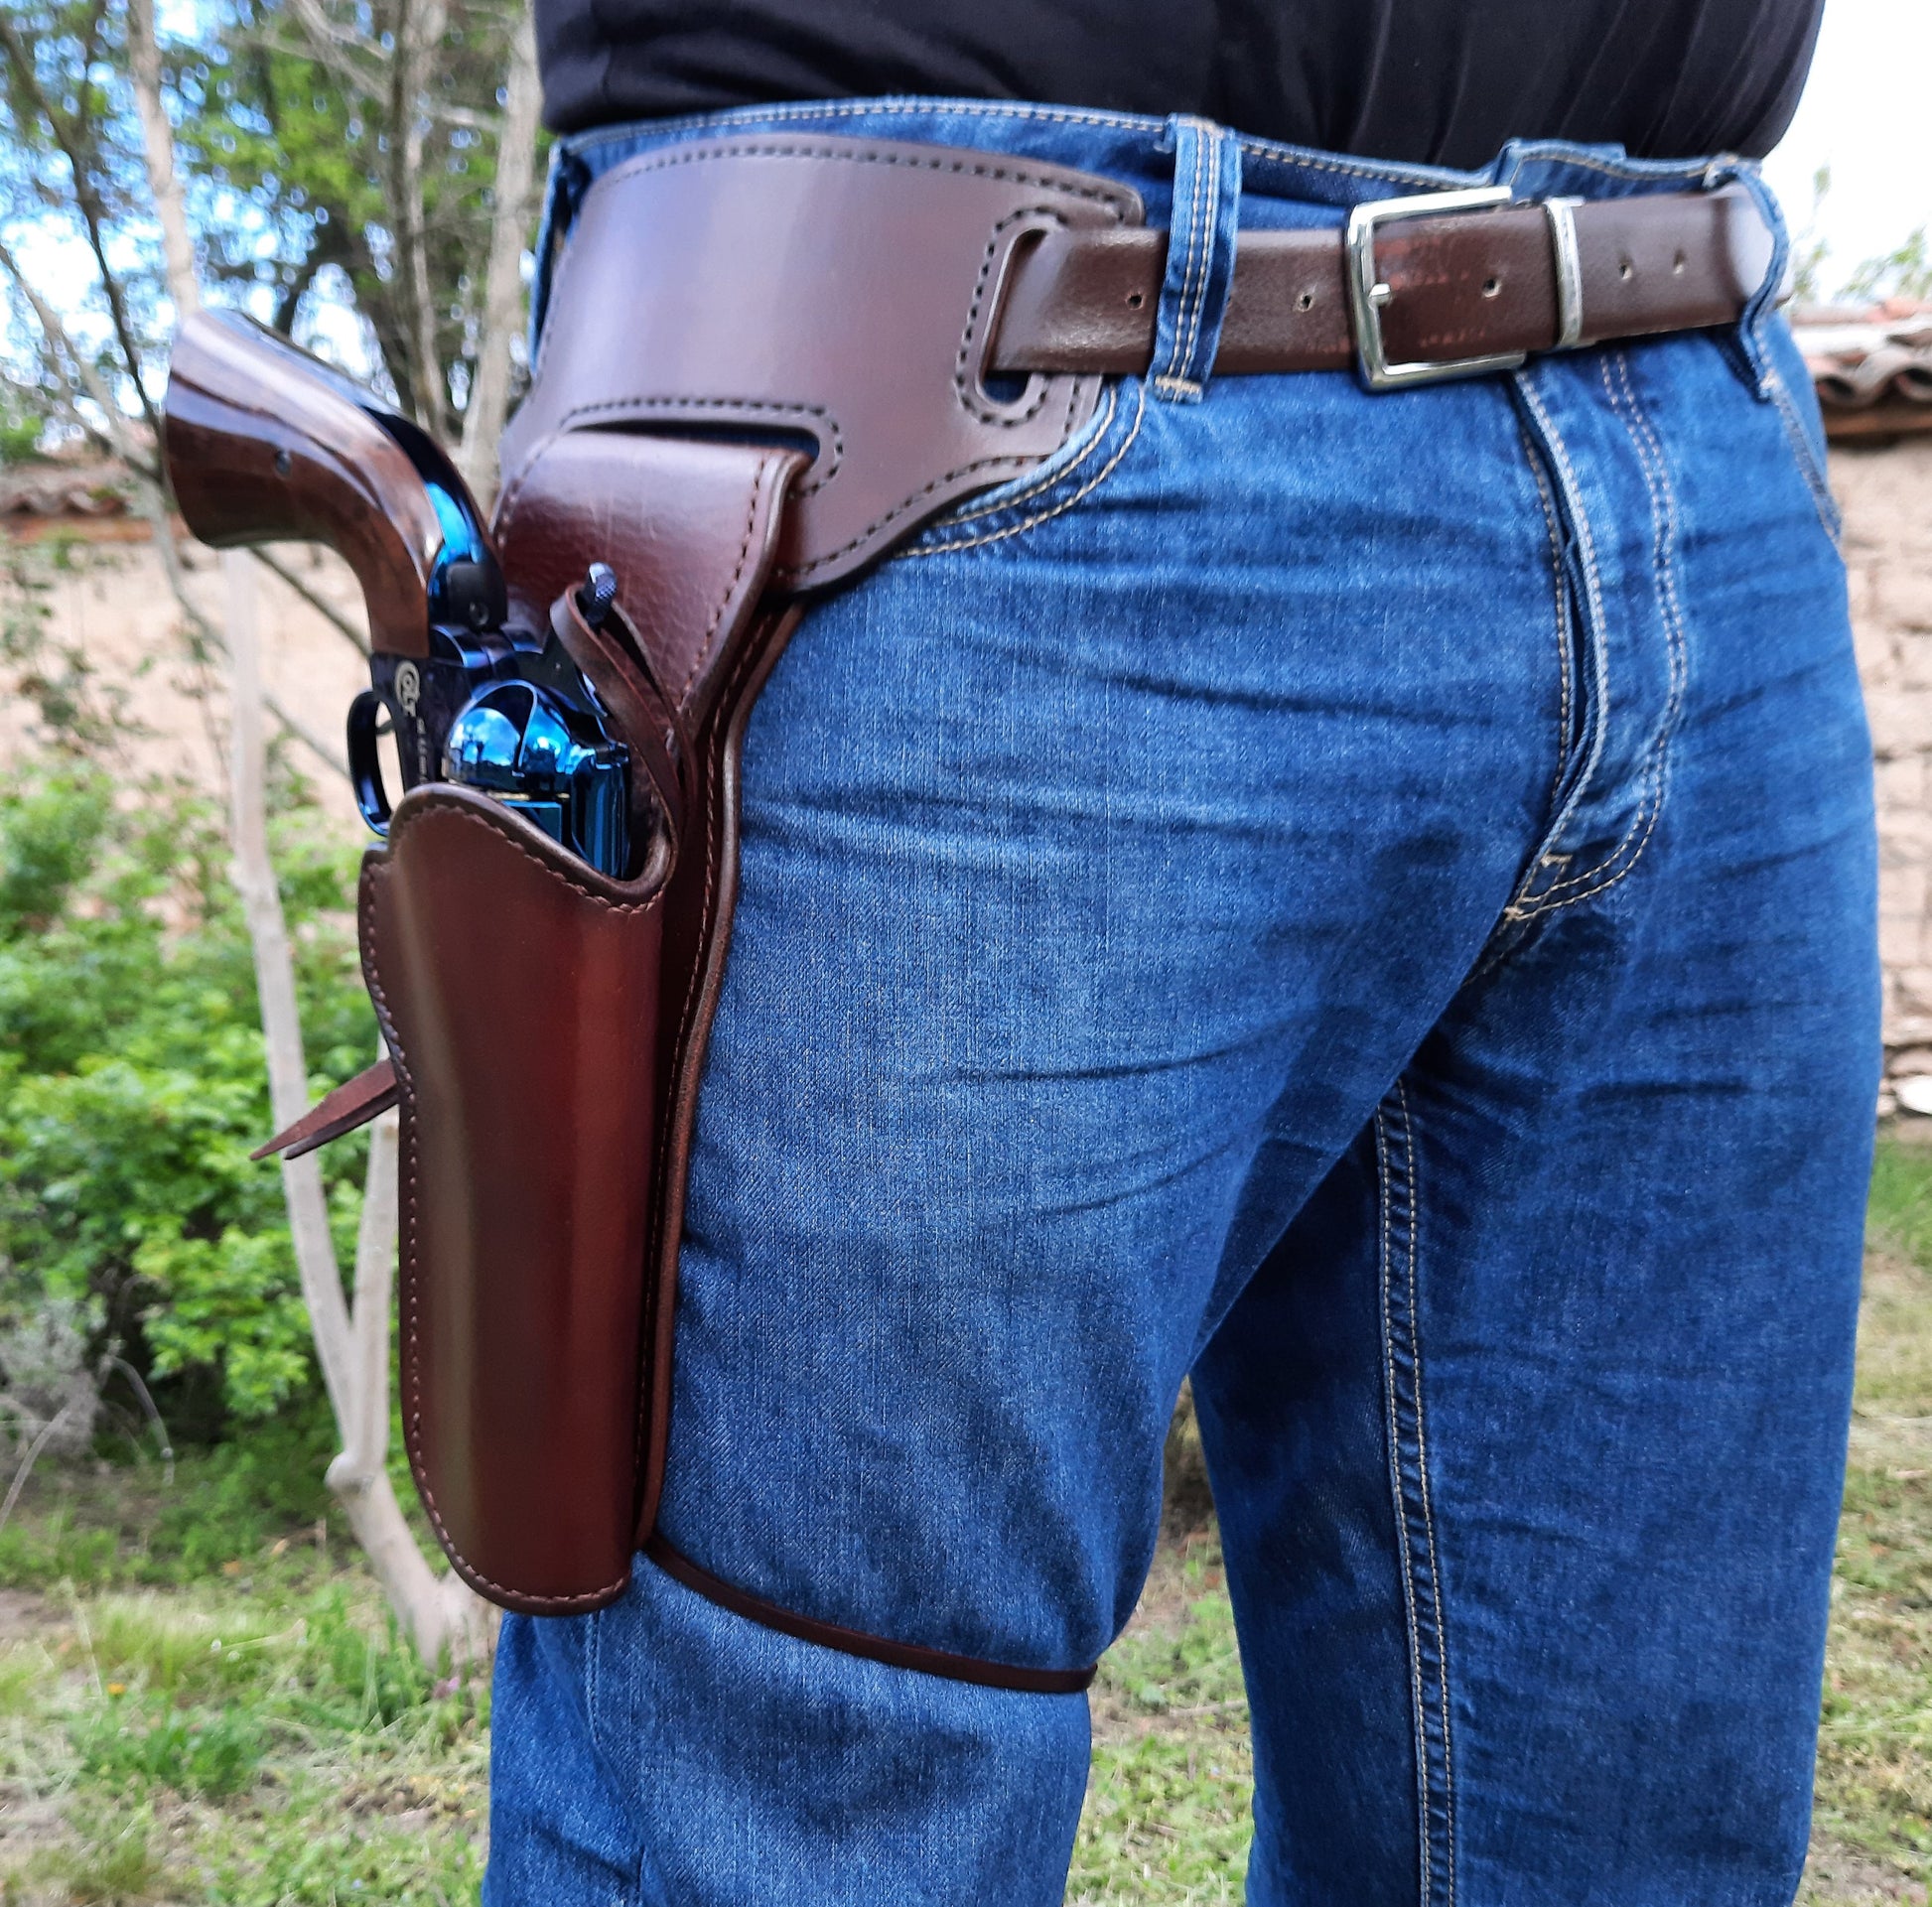 Custom+Leather+Single+Action+holster+and+revolver+belt+featuring+the+Fast+Draw”+design.++KHristoFF 